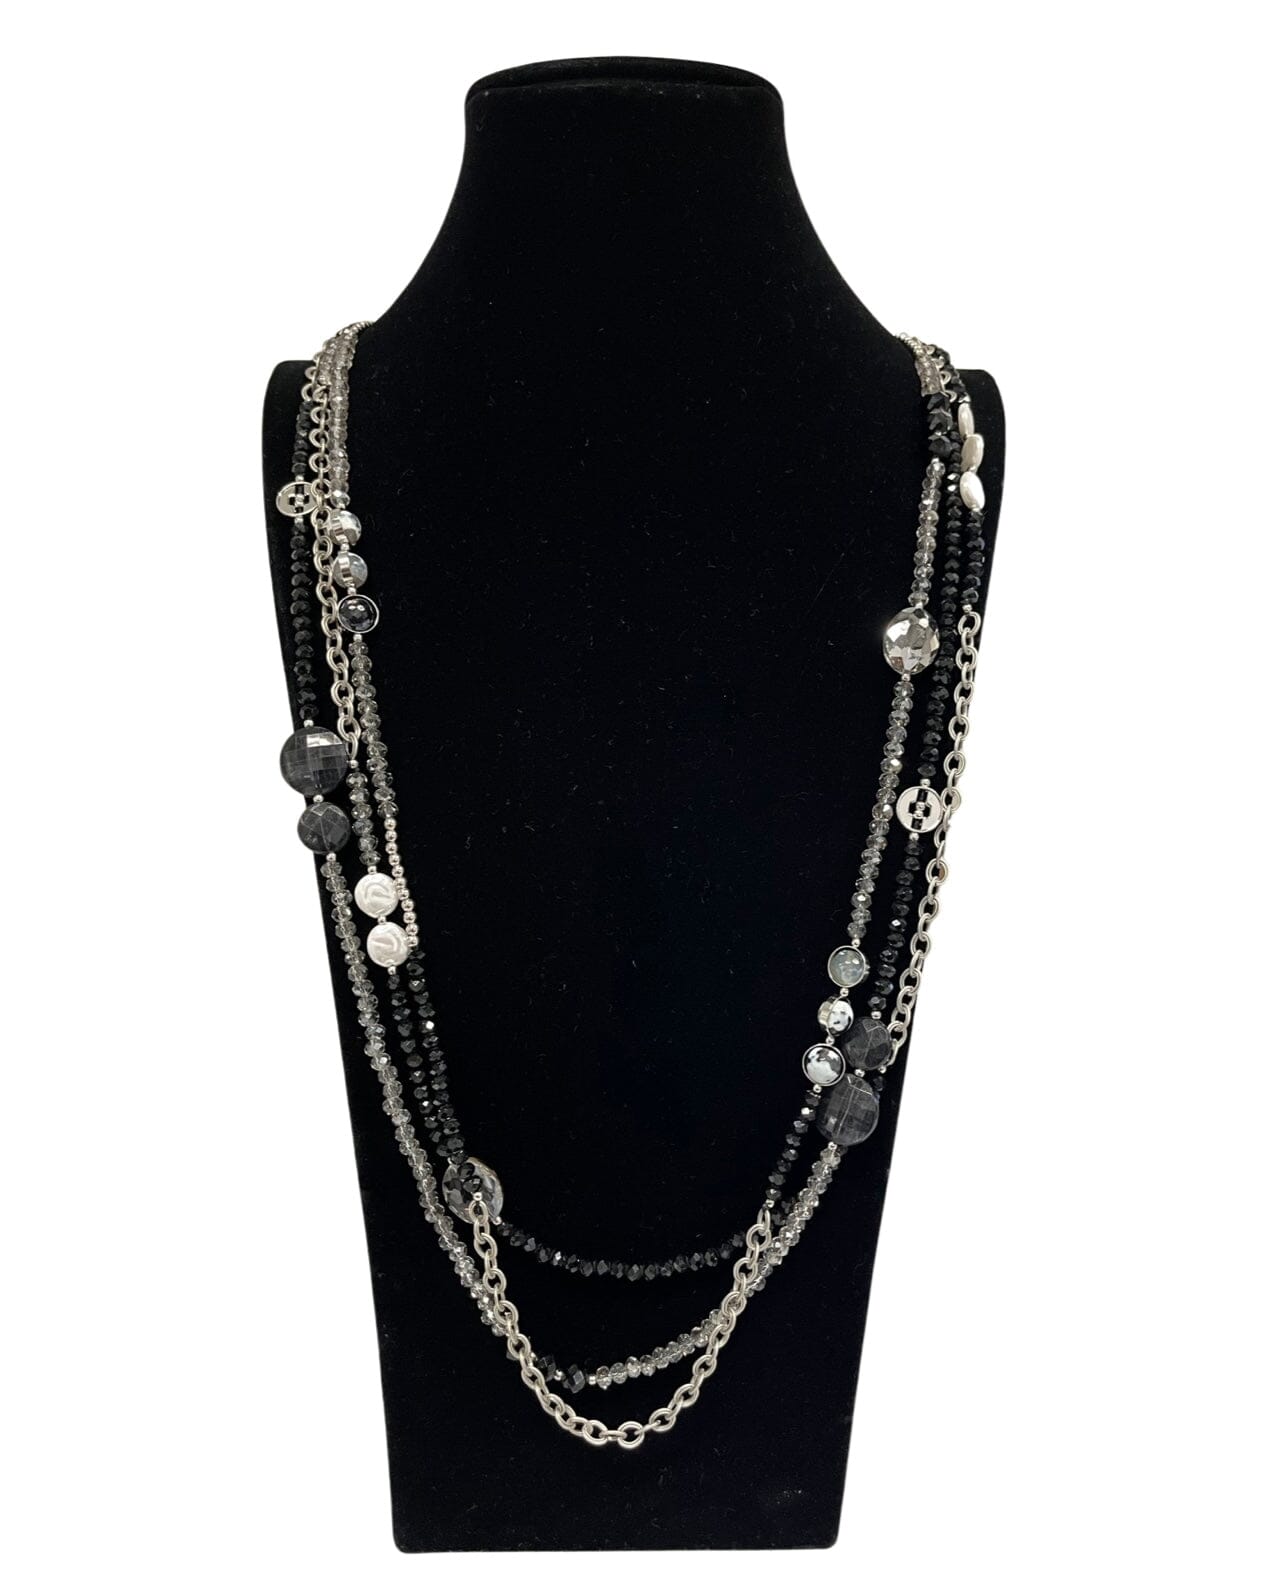 Silver & Black Long Statement Necklace